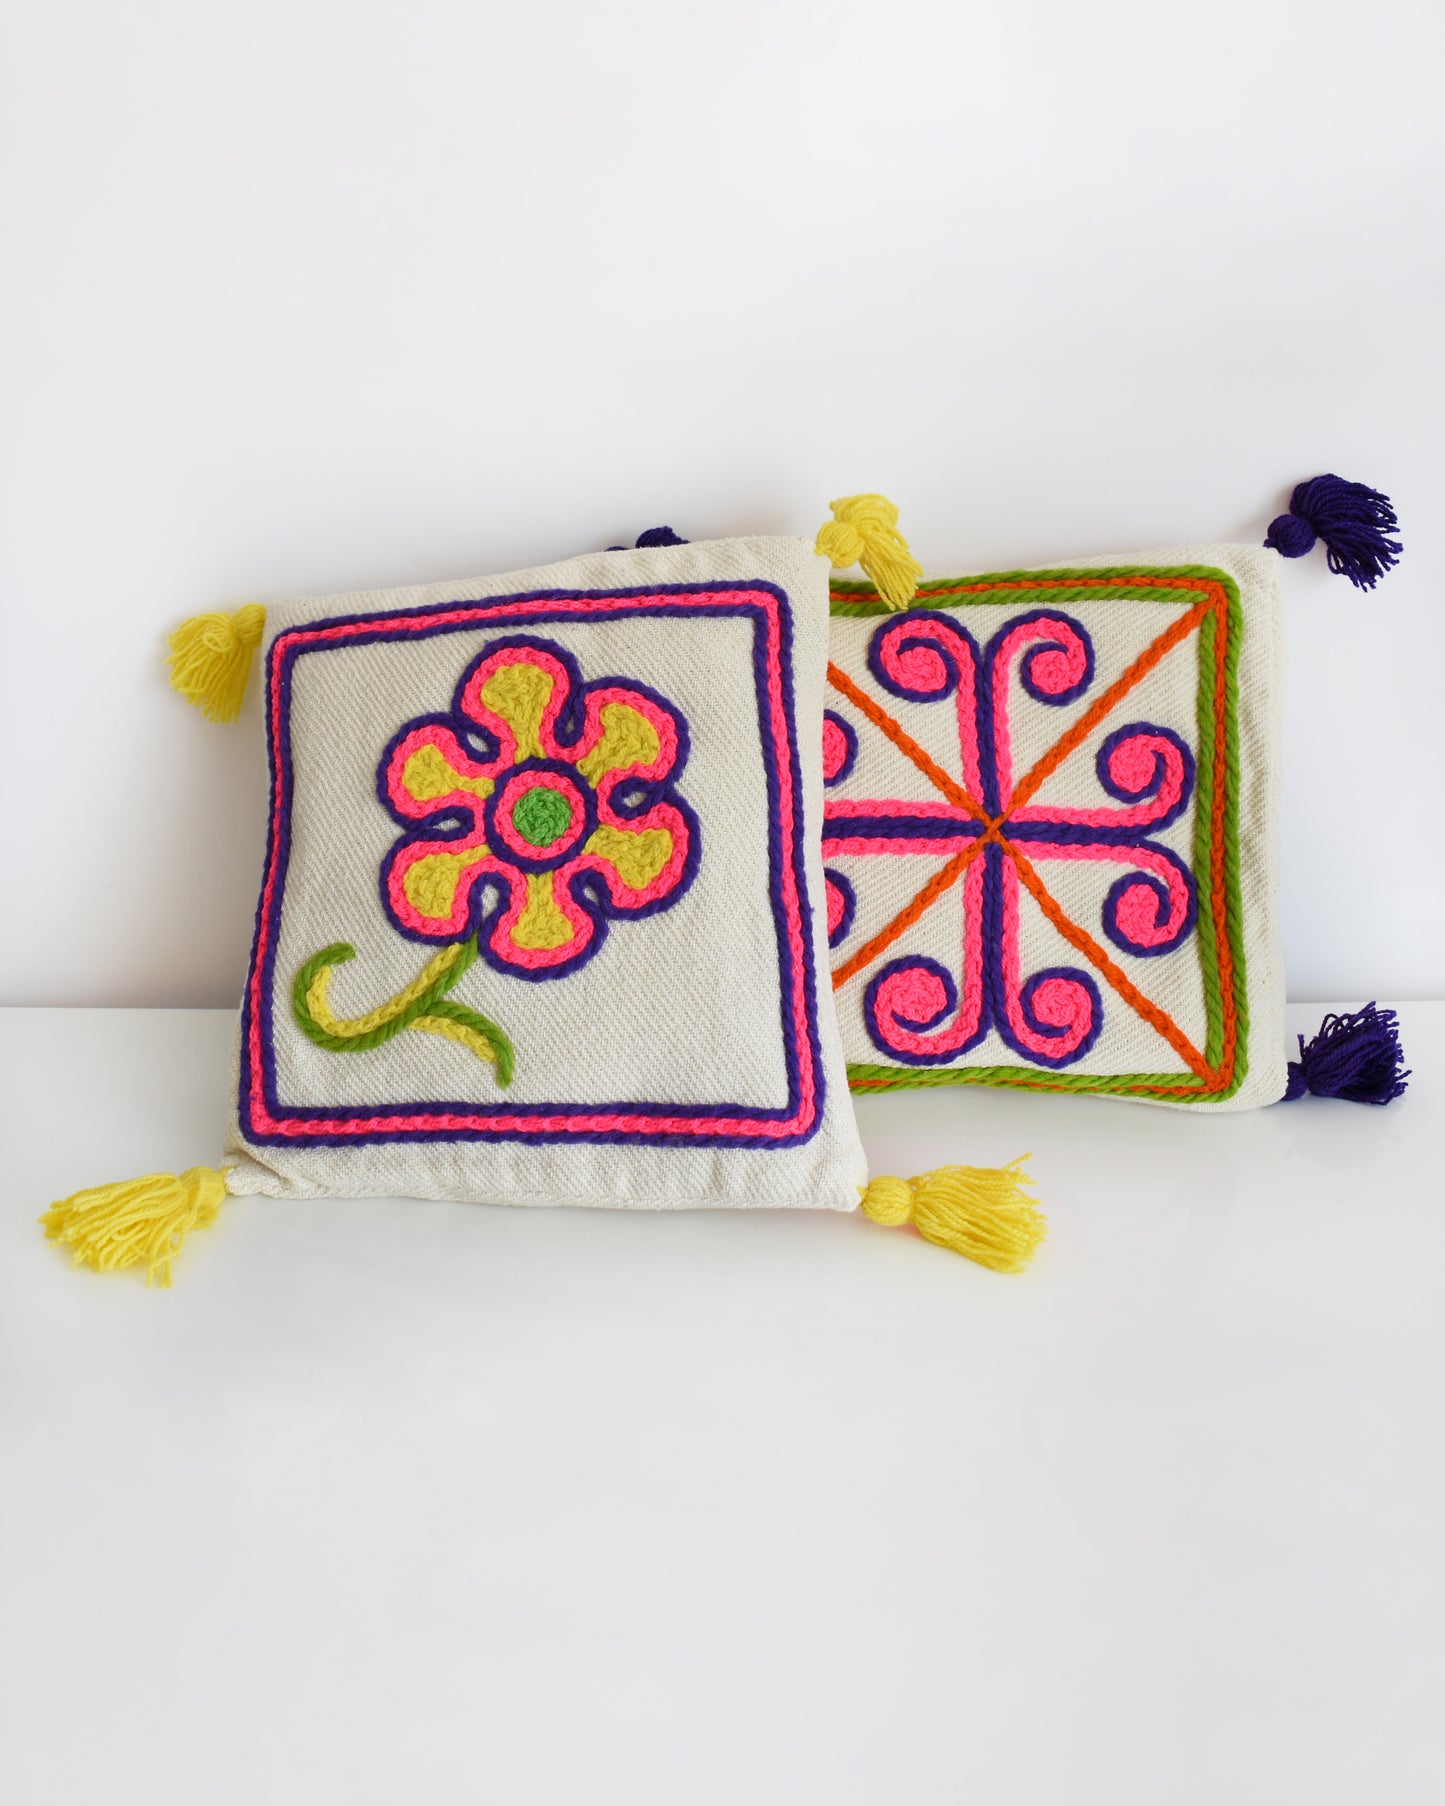 Two vintage crewel embroidered pillows on a table. One has a flower with yellow tassels and another has a curly cross with purple tassels.